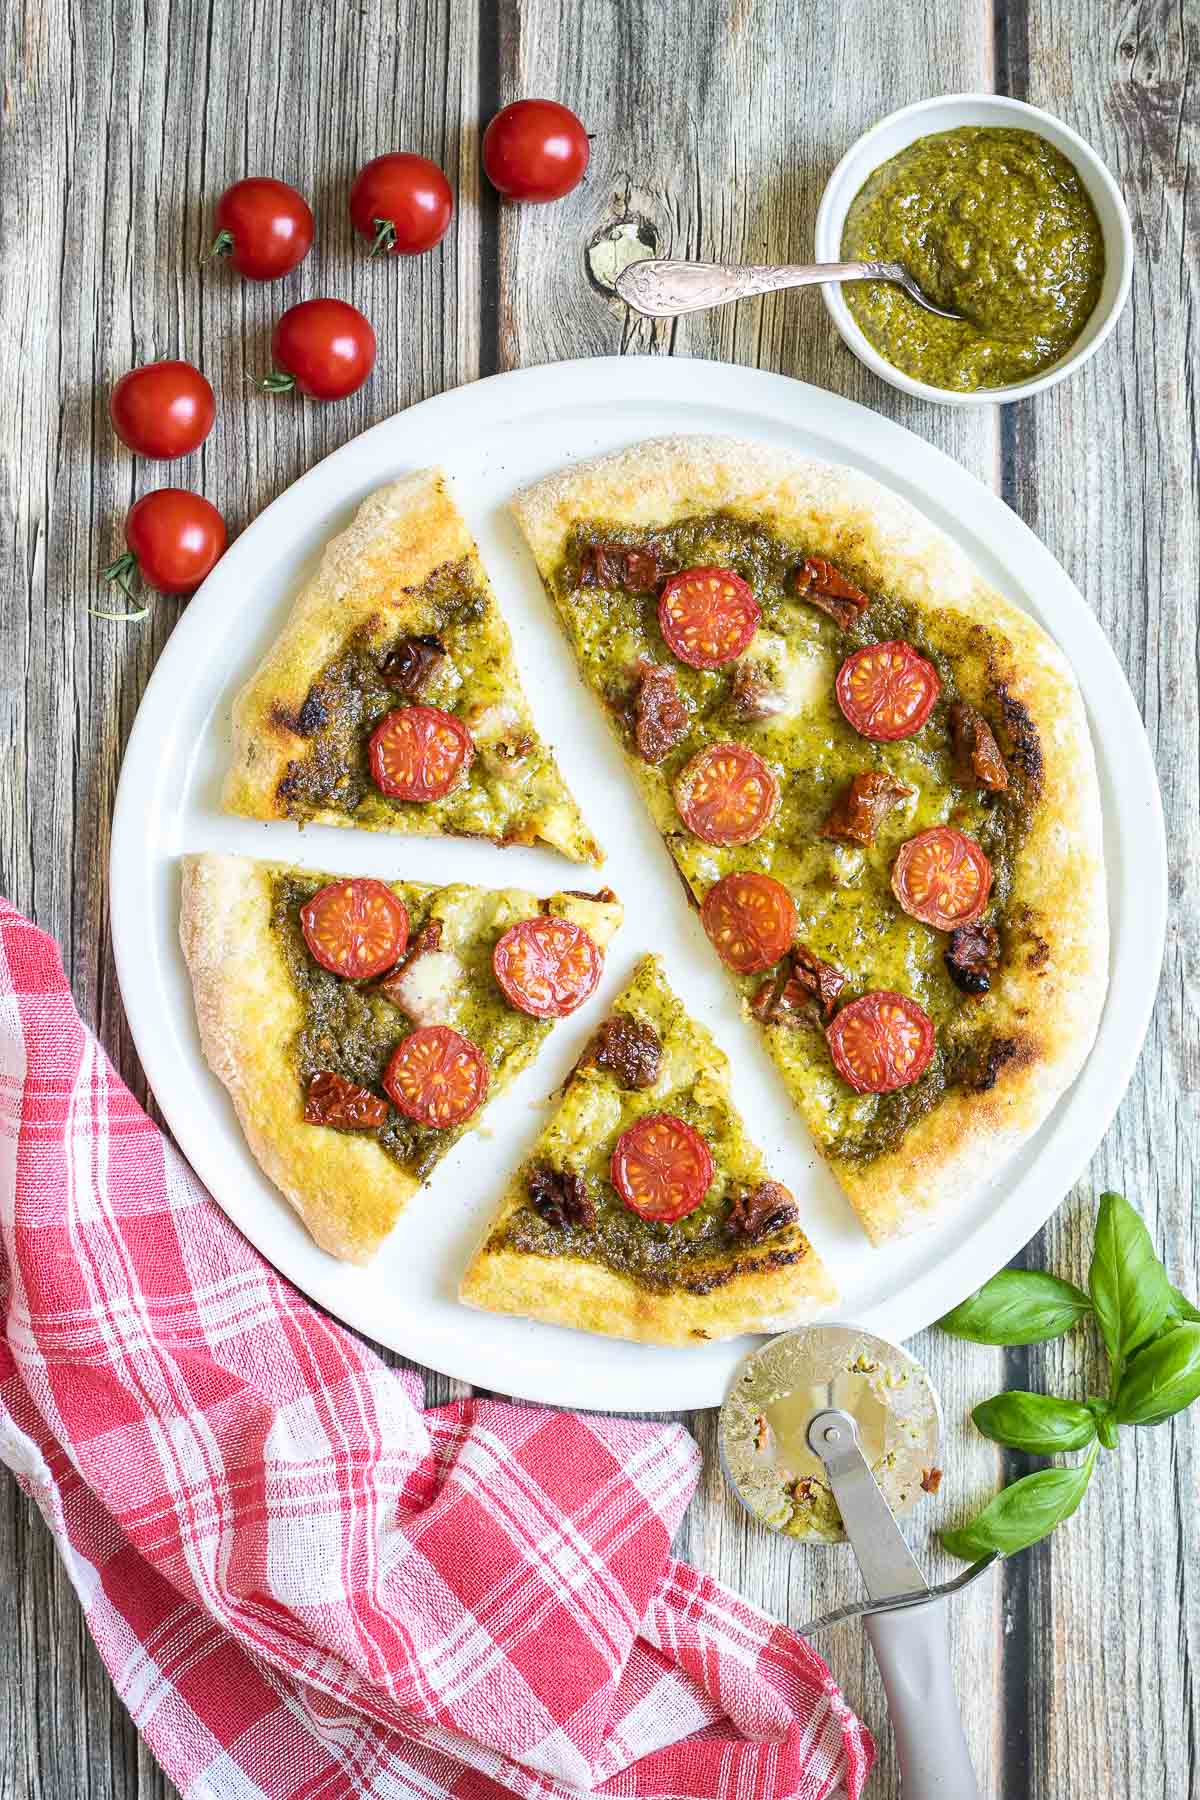 Sliced pizza on a white pizza plate topped with green pesto, melted cheese, sun-dried tomato pieces, and halved cherry tomatoes. More pesto and fresh ingredients next to the plate.  